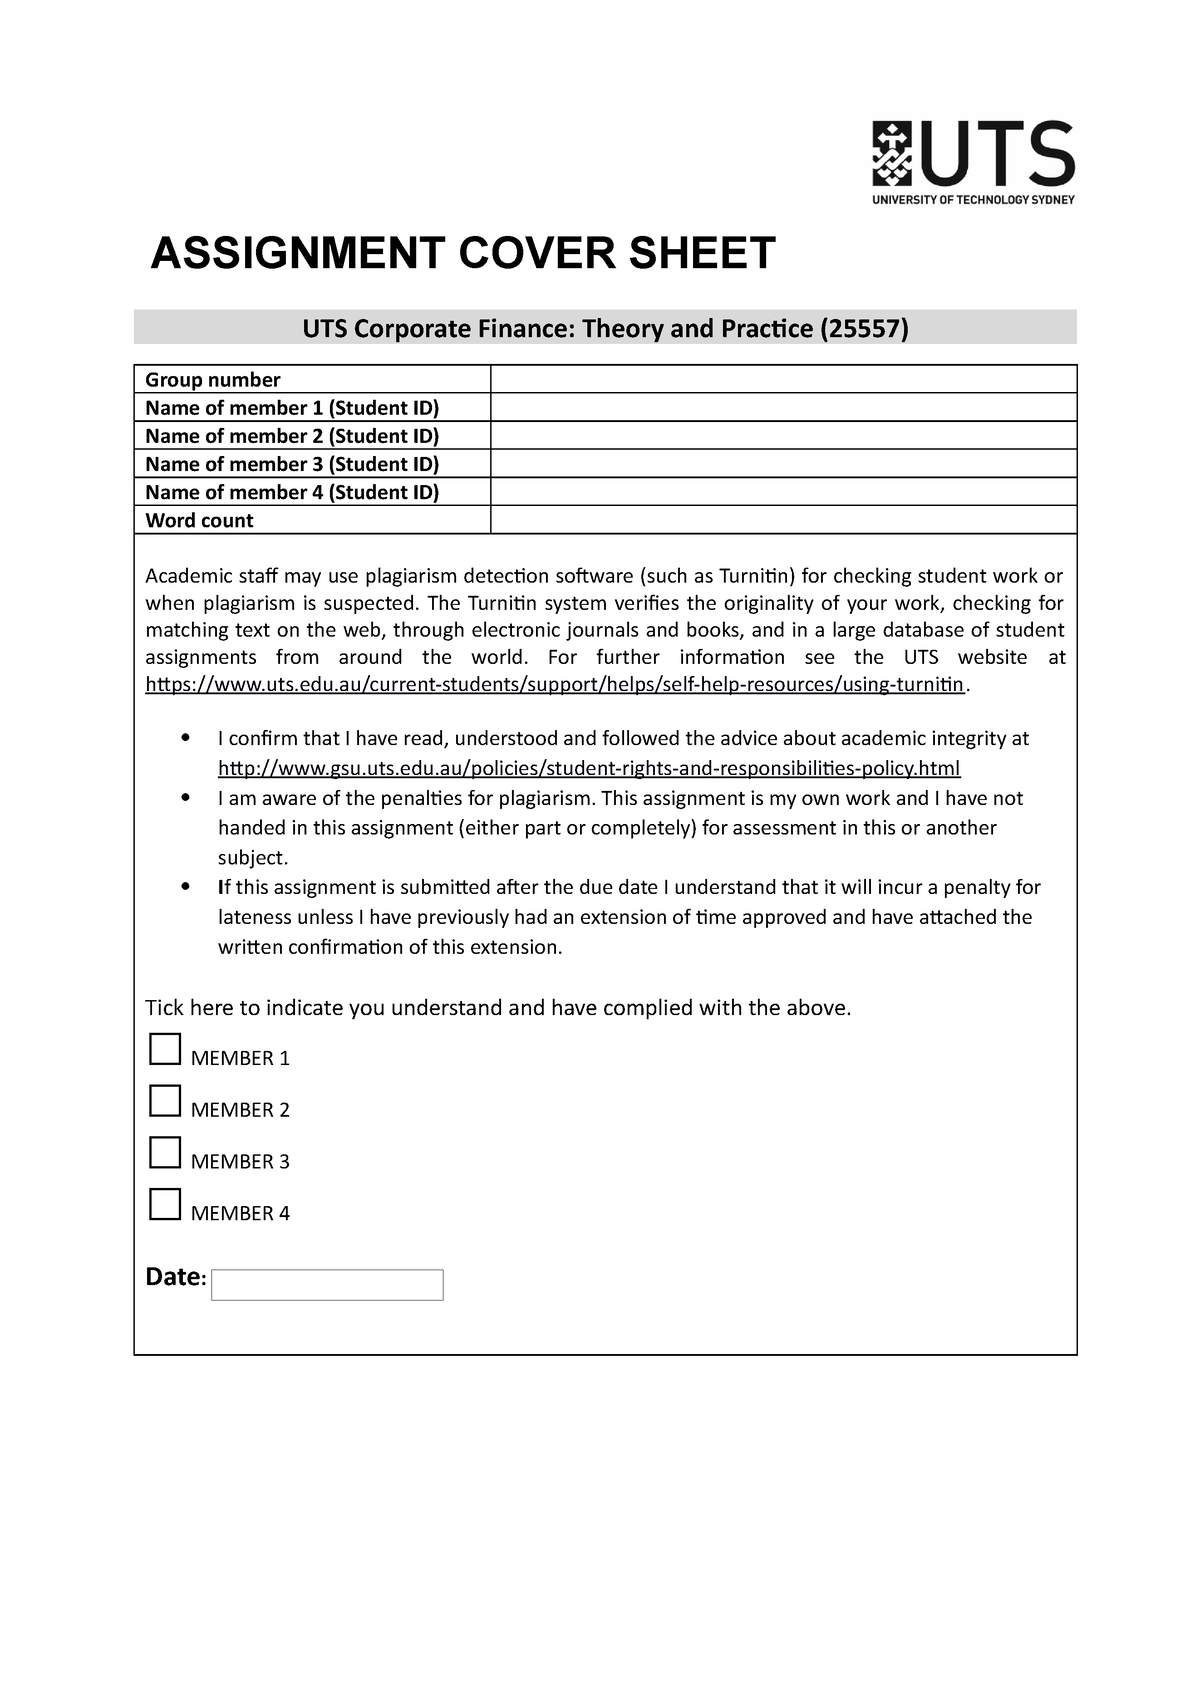 uts assignment cover sheet 2022